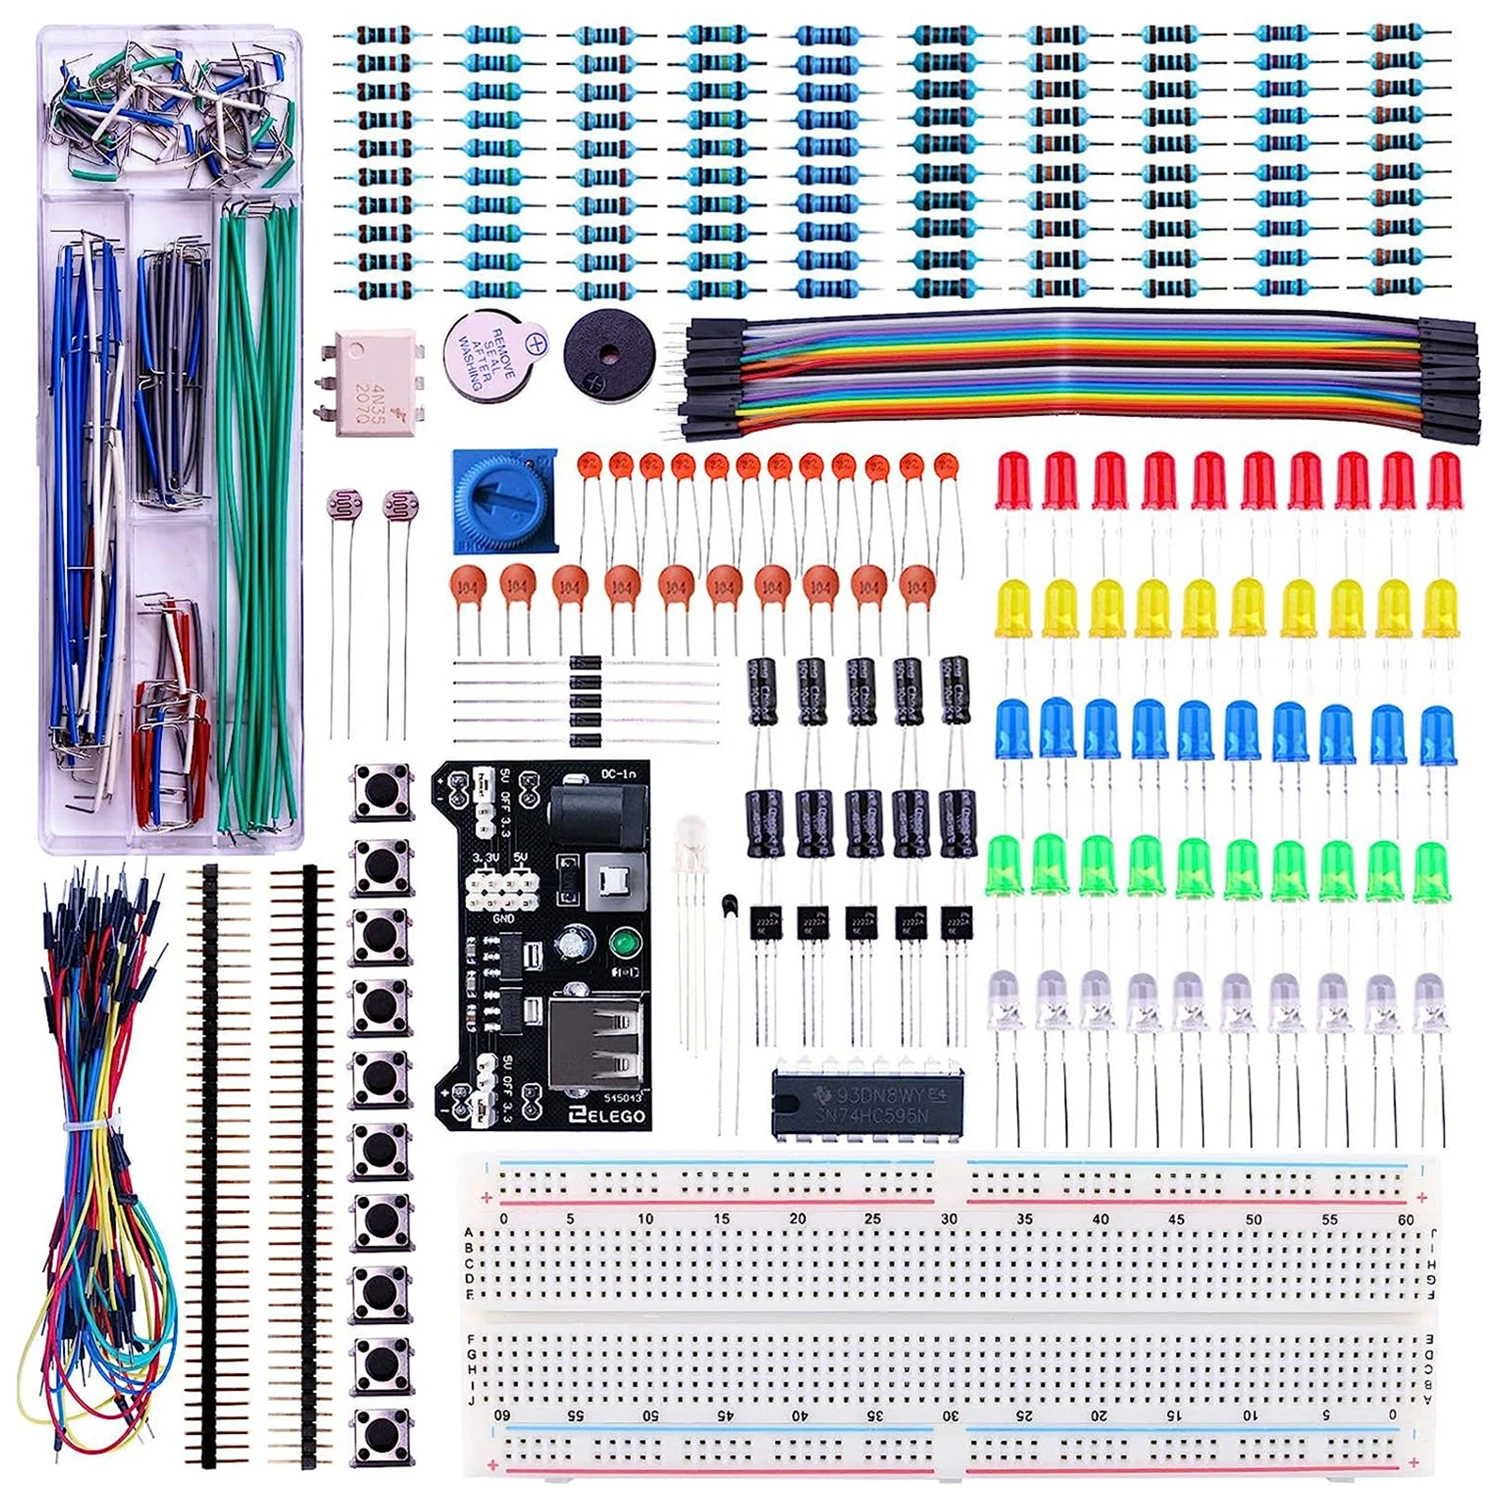 

ELEGOO Upgraded Electronics Fun Kit Compatible with Arduino, STM32 w/Power Supply Module,Jumper Wire,Precision Potentiometer